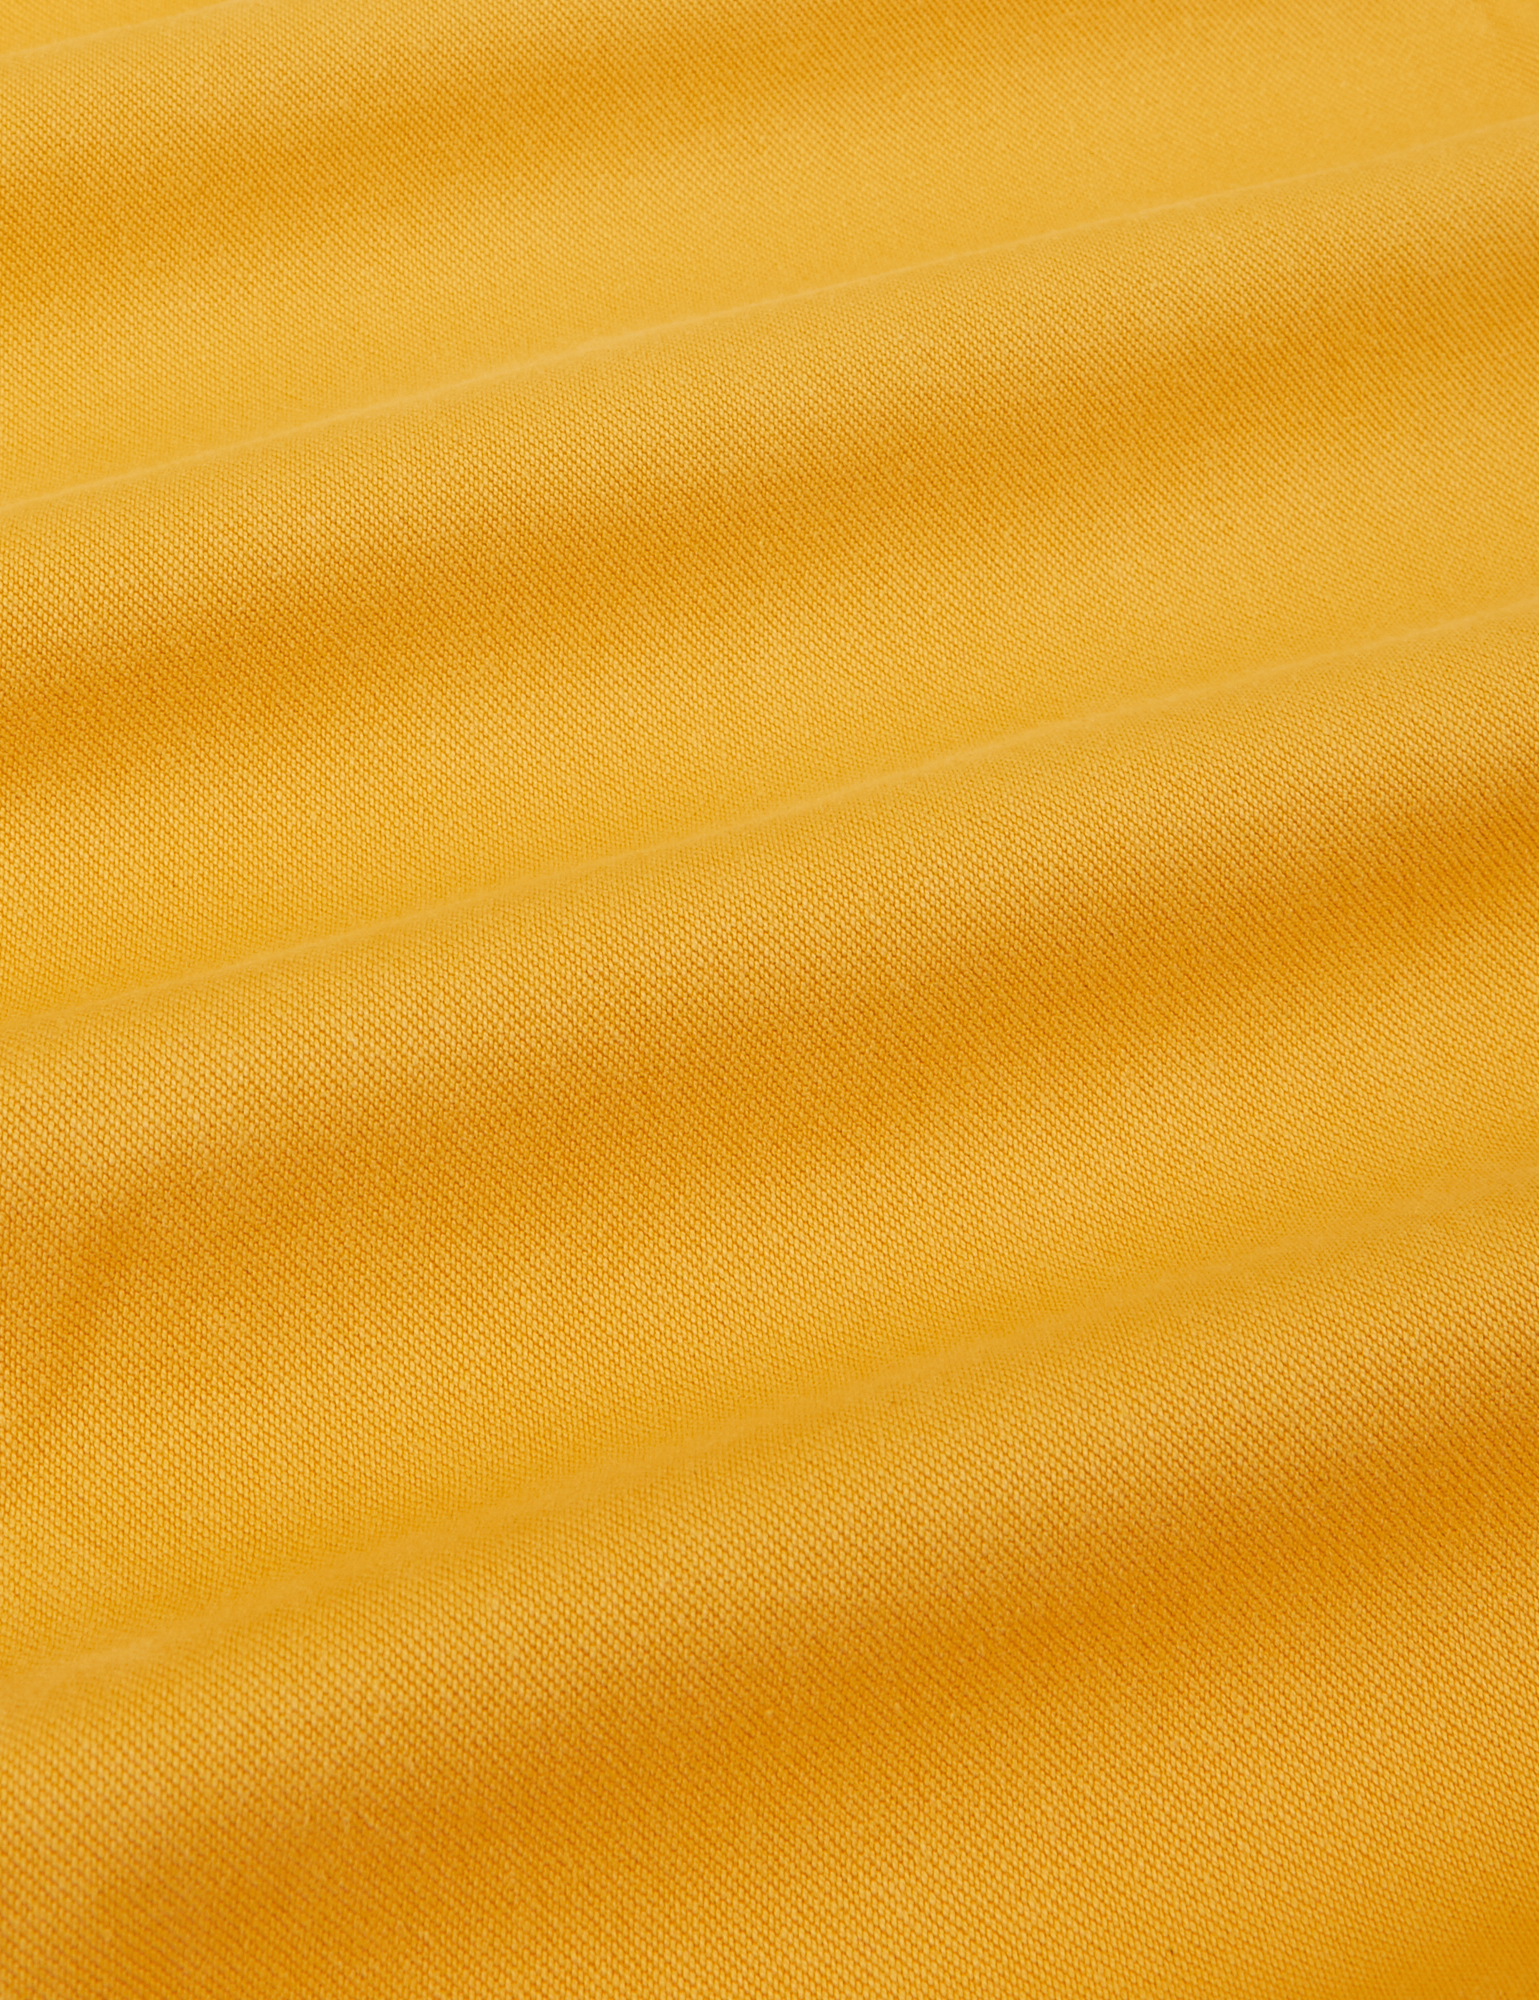 Organic Trousers in Mustard Yellow fabric detail close up